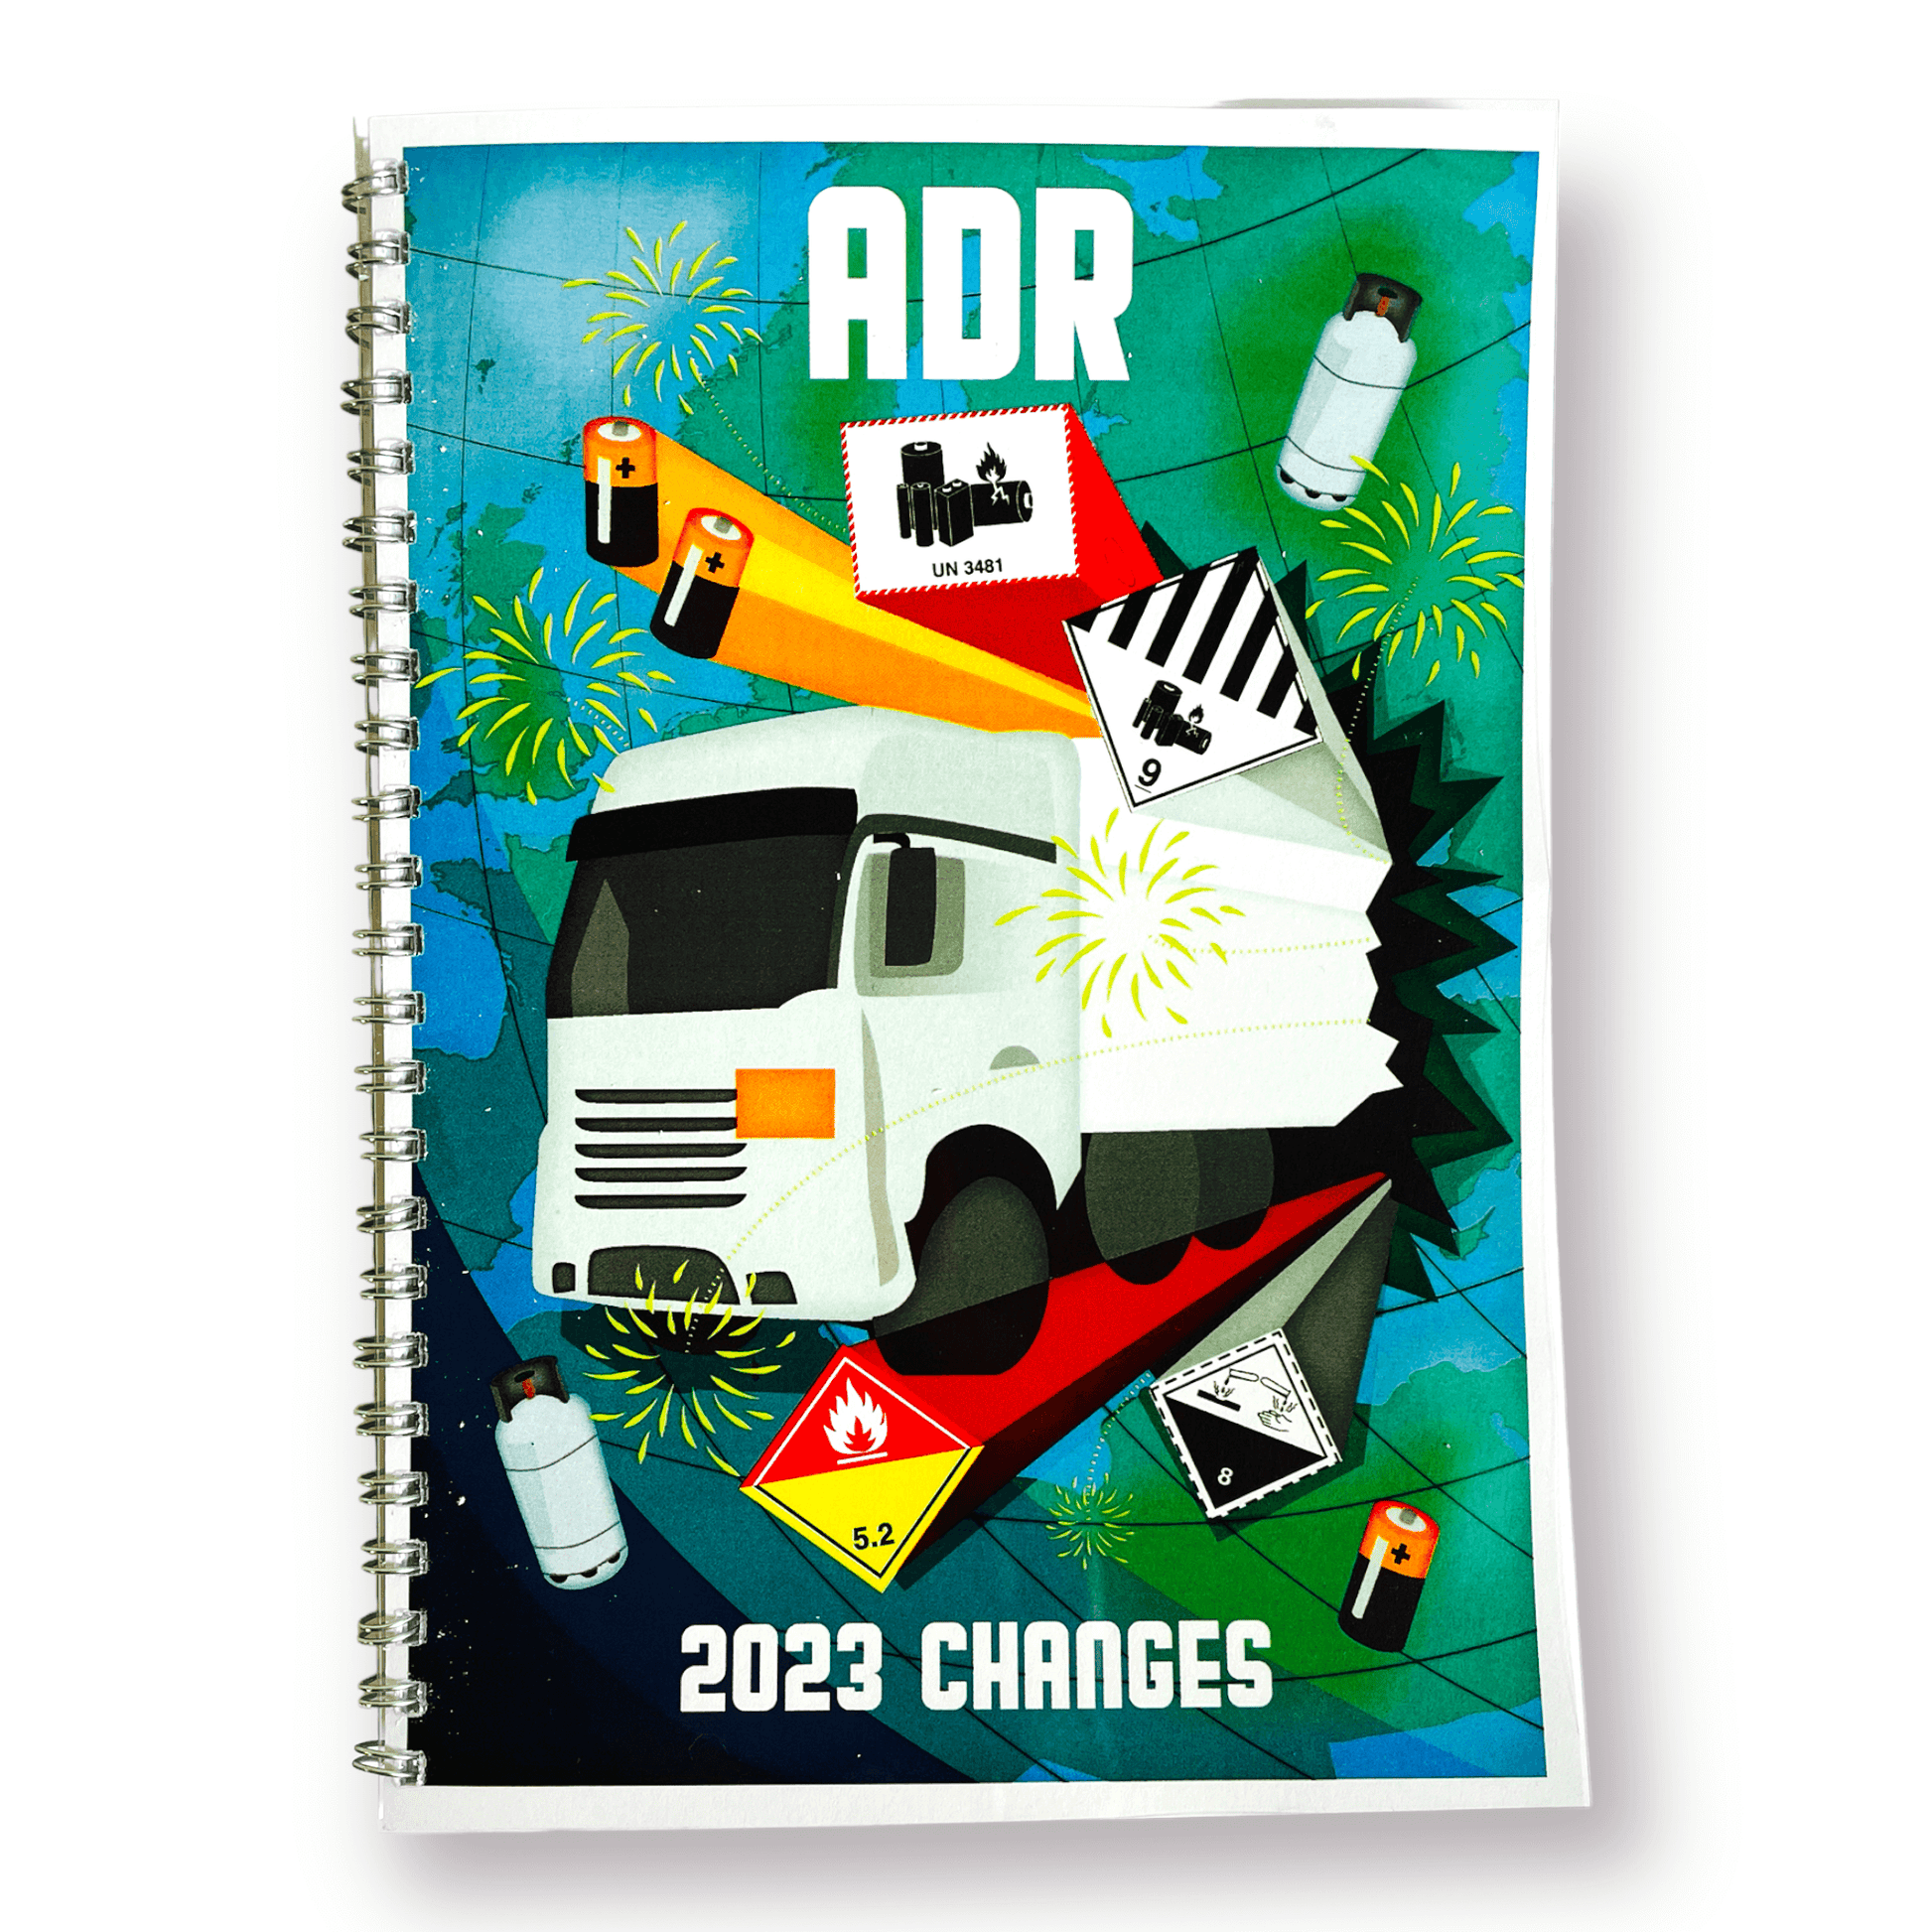 Changes in ADR from 2023